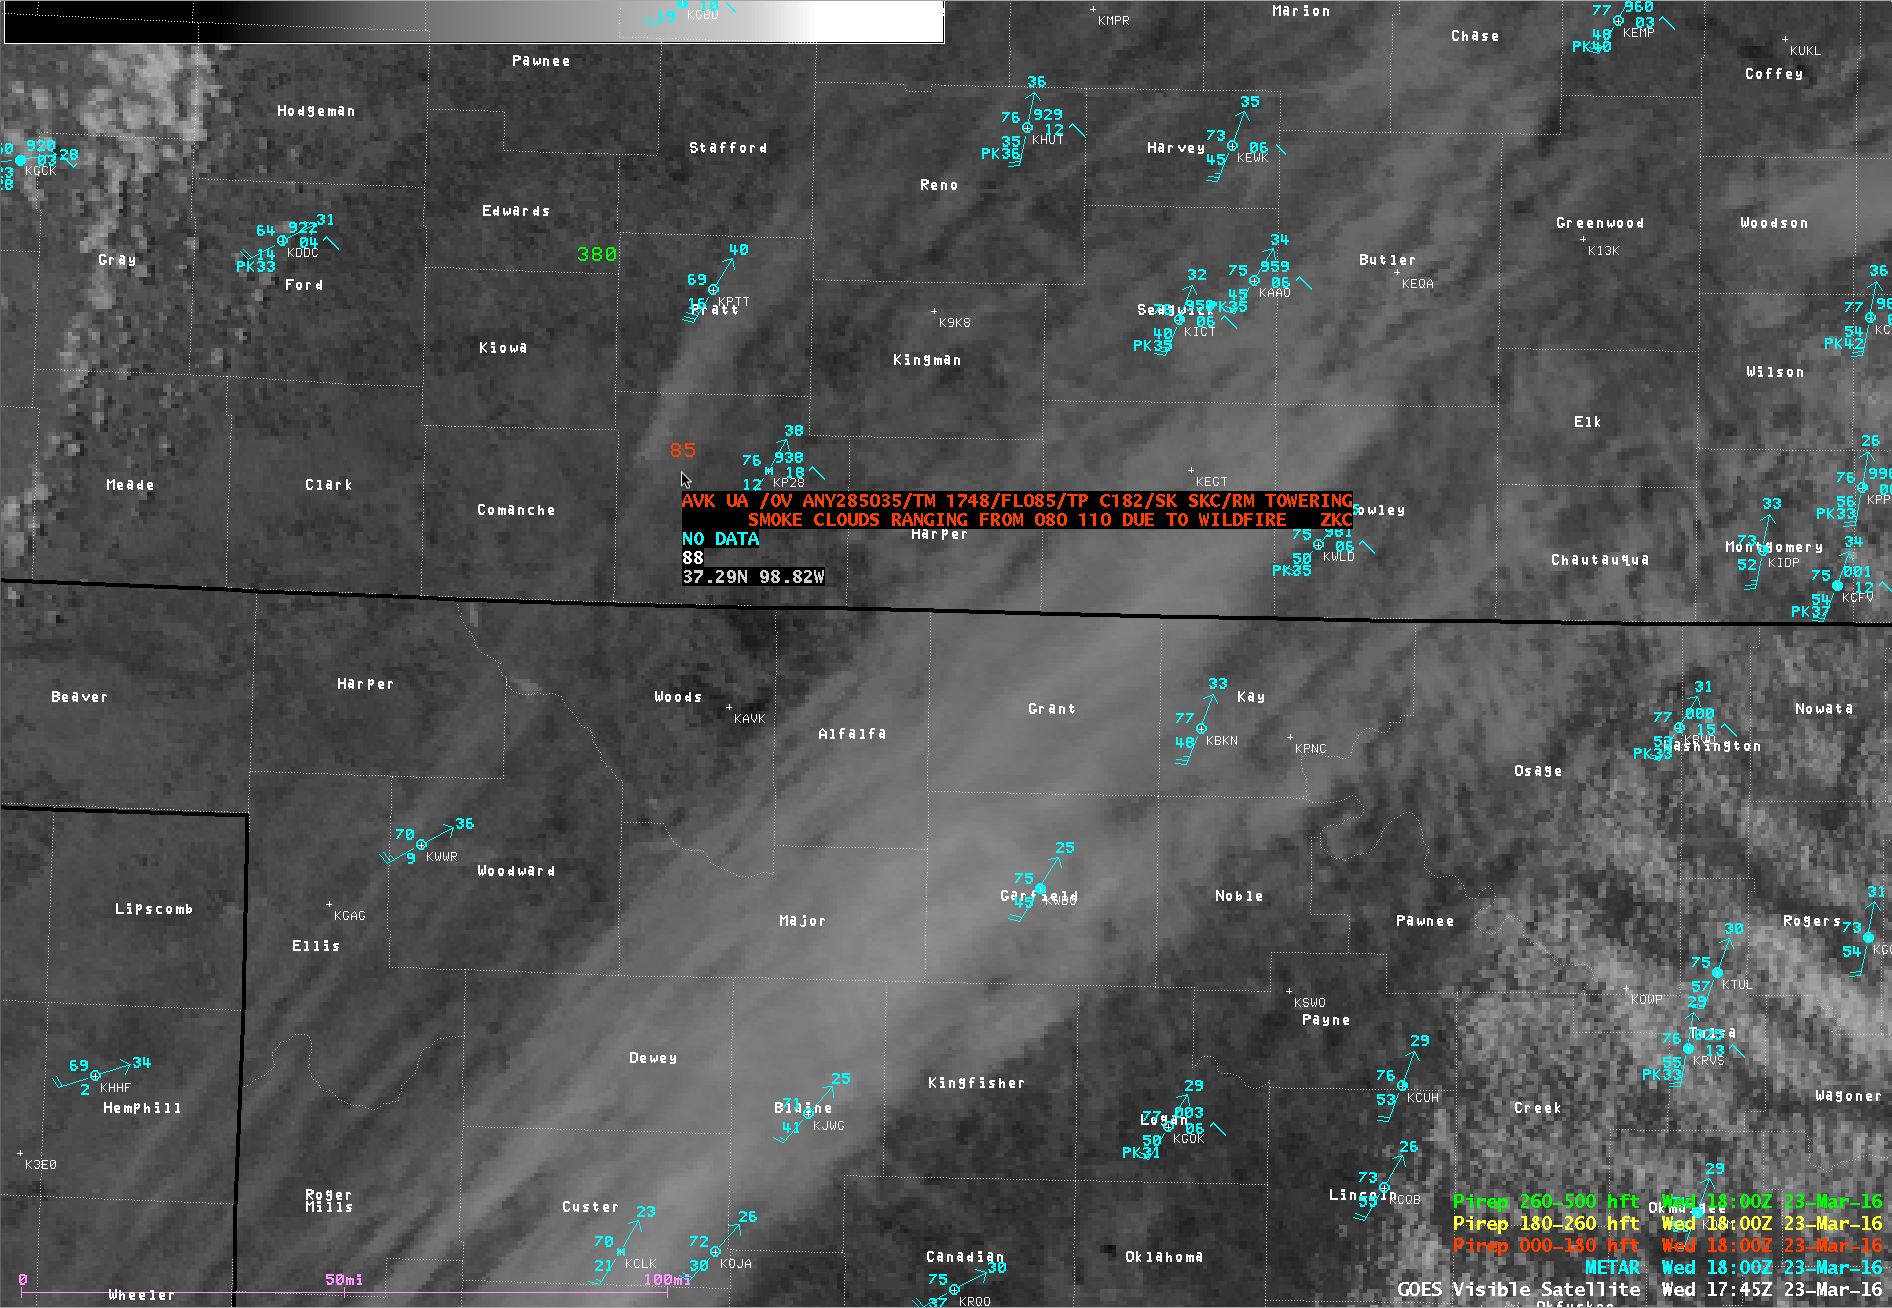 GOES-13 Visible (0.63 µm) image, with surface reports and a pilot report of smoke altitude [click to enlarge]